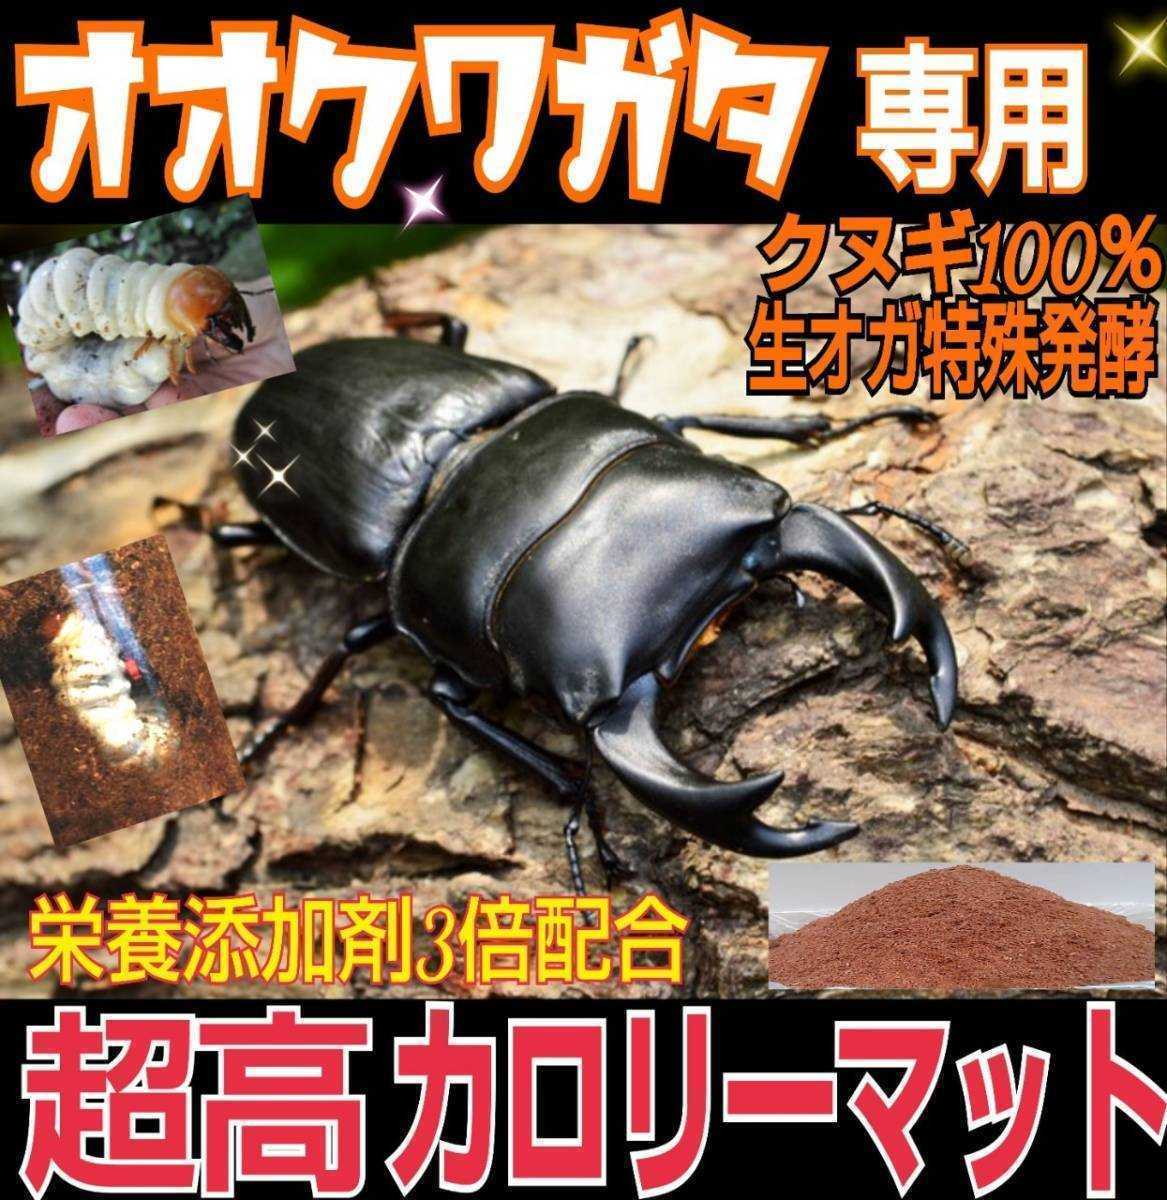  oo stag beetle exclusive use * super height calorie mat raw oga. special departure .! symbiosis bacteria * special amino acid etc. nutrition addition agent .3 times combination * the first . from meal . attaching eminent 